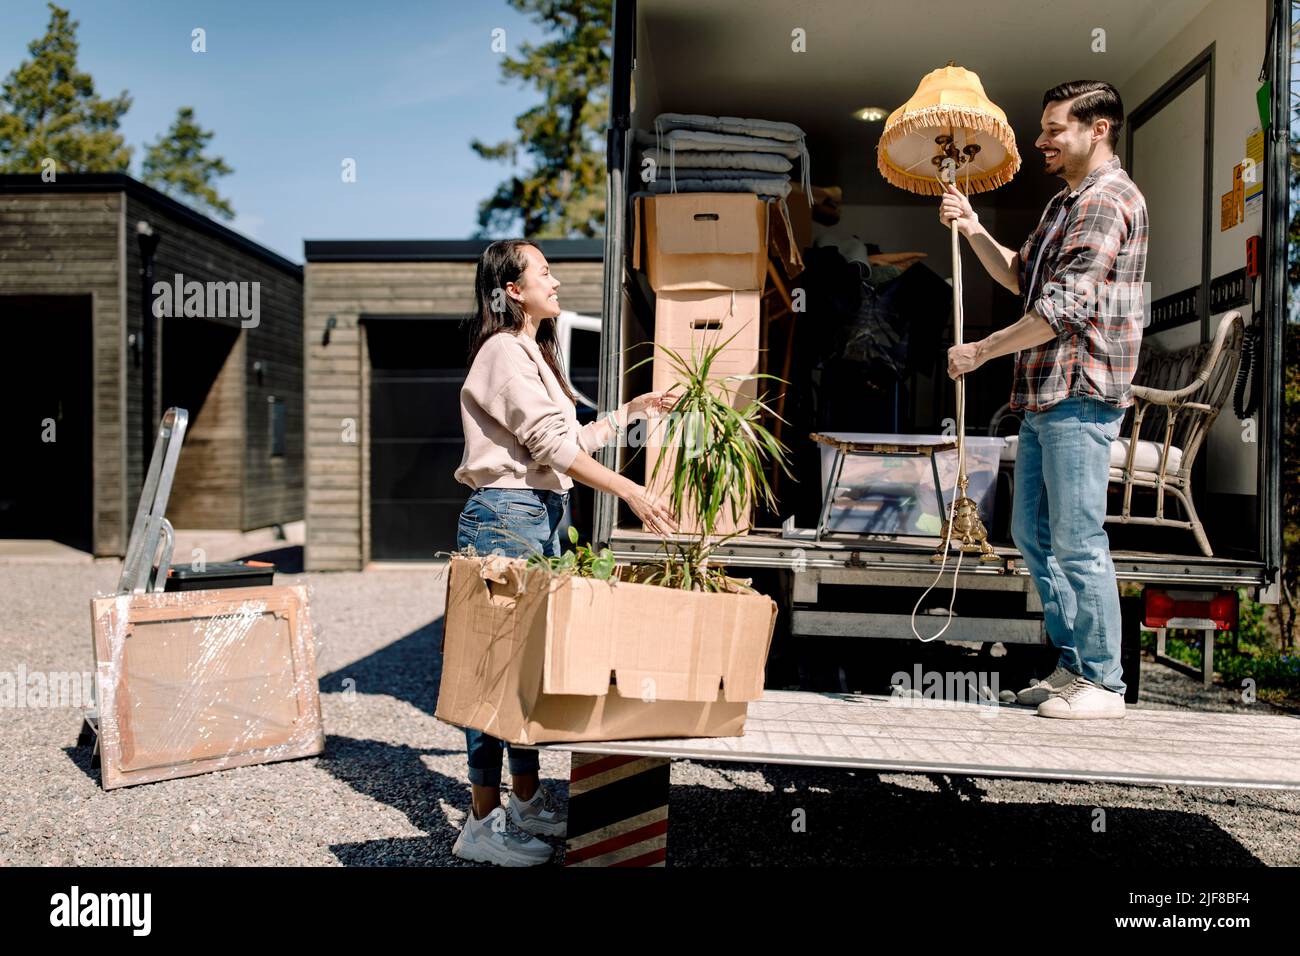 Couple unloading cardboard boxes from truck during sunny day Stock Photo